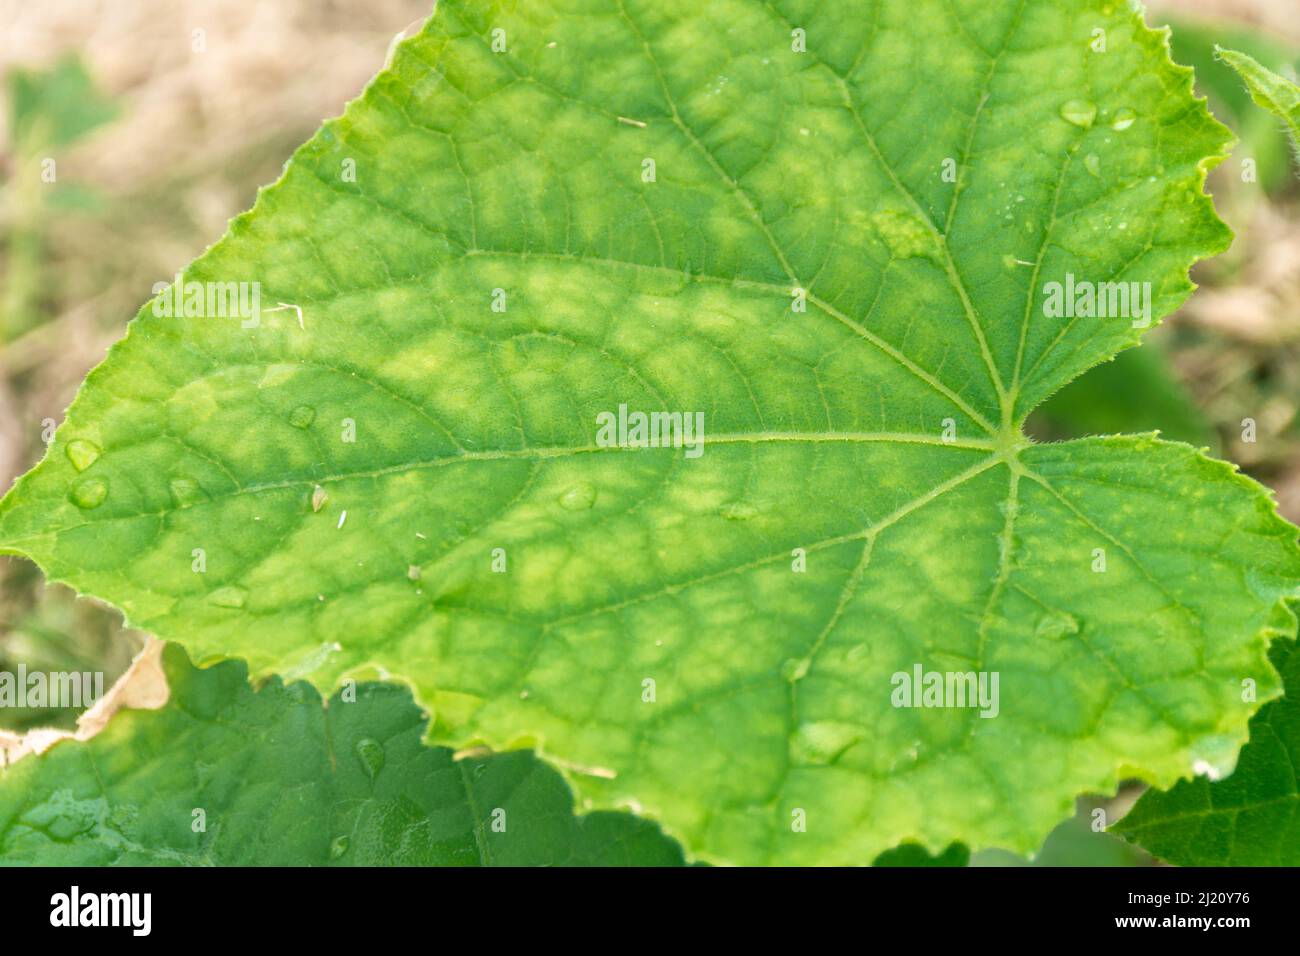 cucumber leaf with yellowish spots arising from lack of nutrition or unbalanced nutrition, selective focus Stock Photo